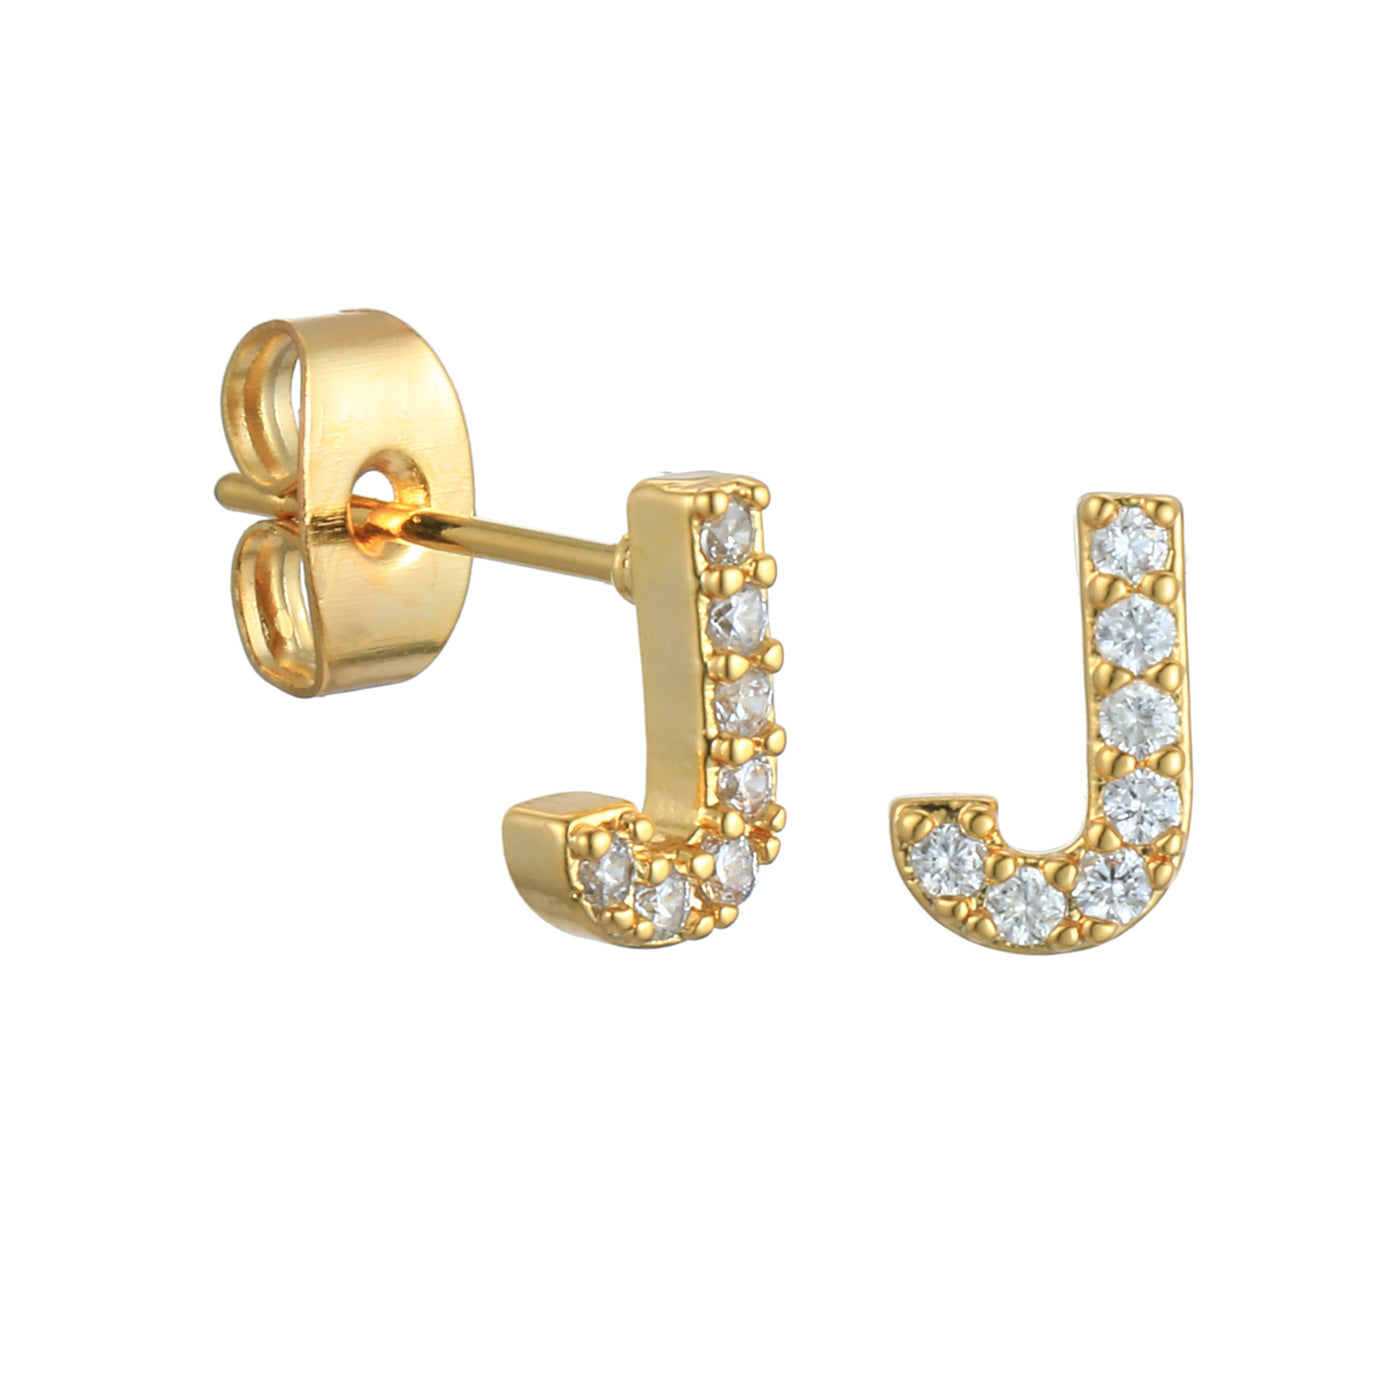 Letter ear studs with zirconia